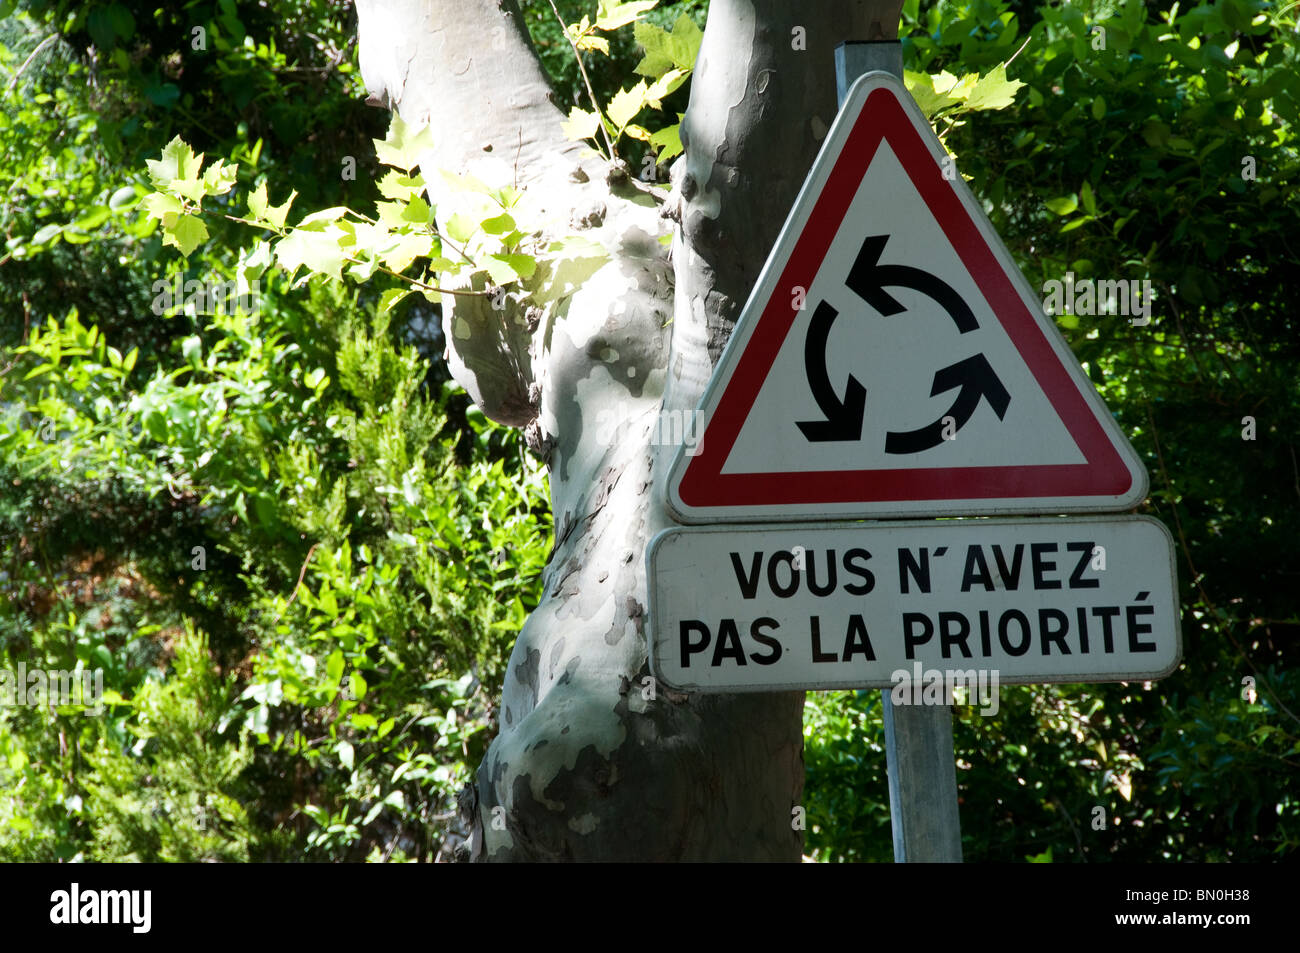 A French road sign warning that you do not have priority at a roundabout. Stock Photo